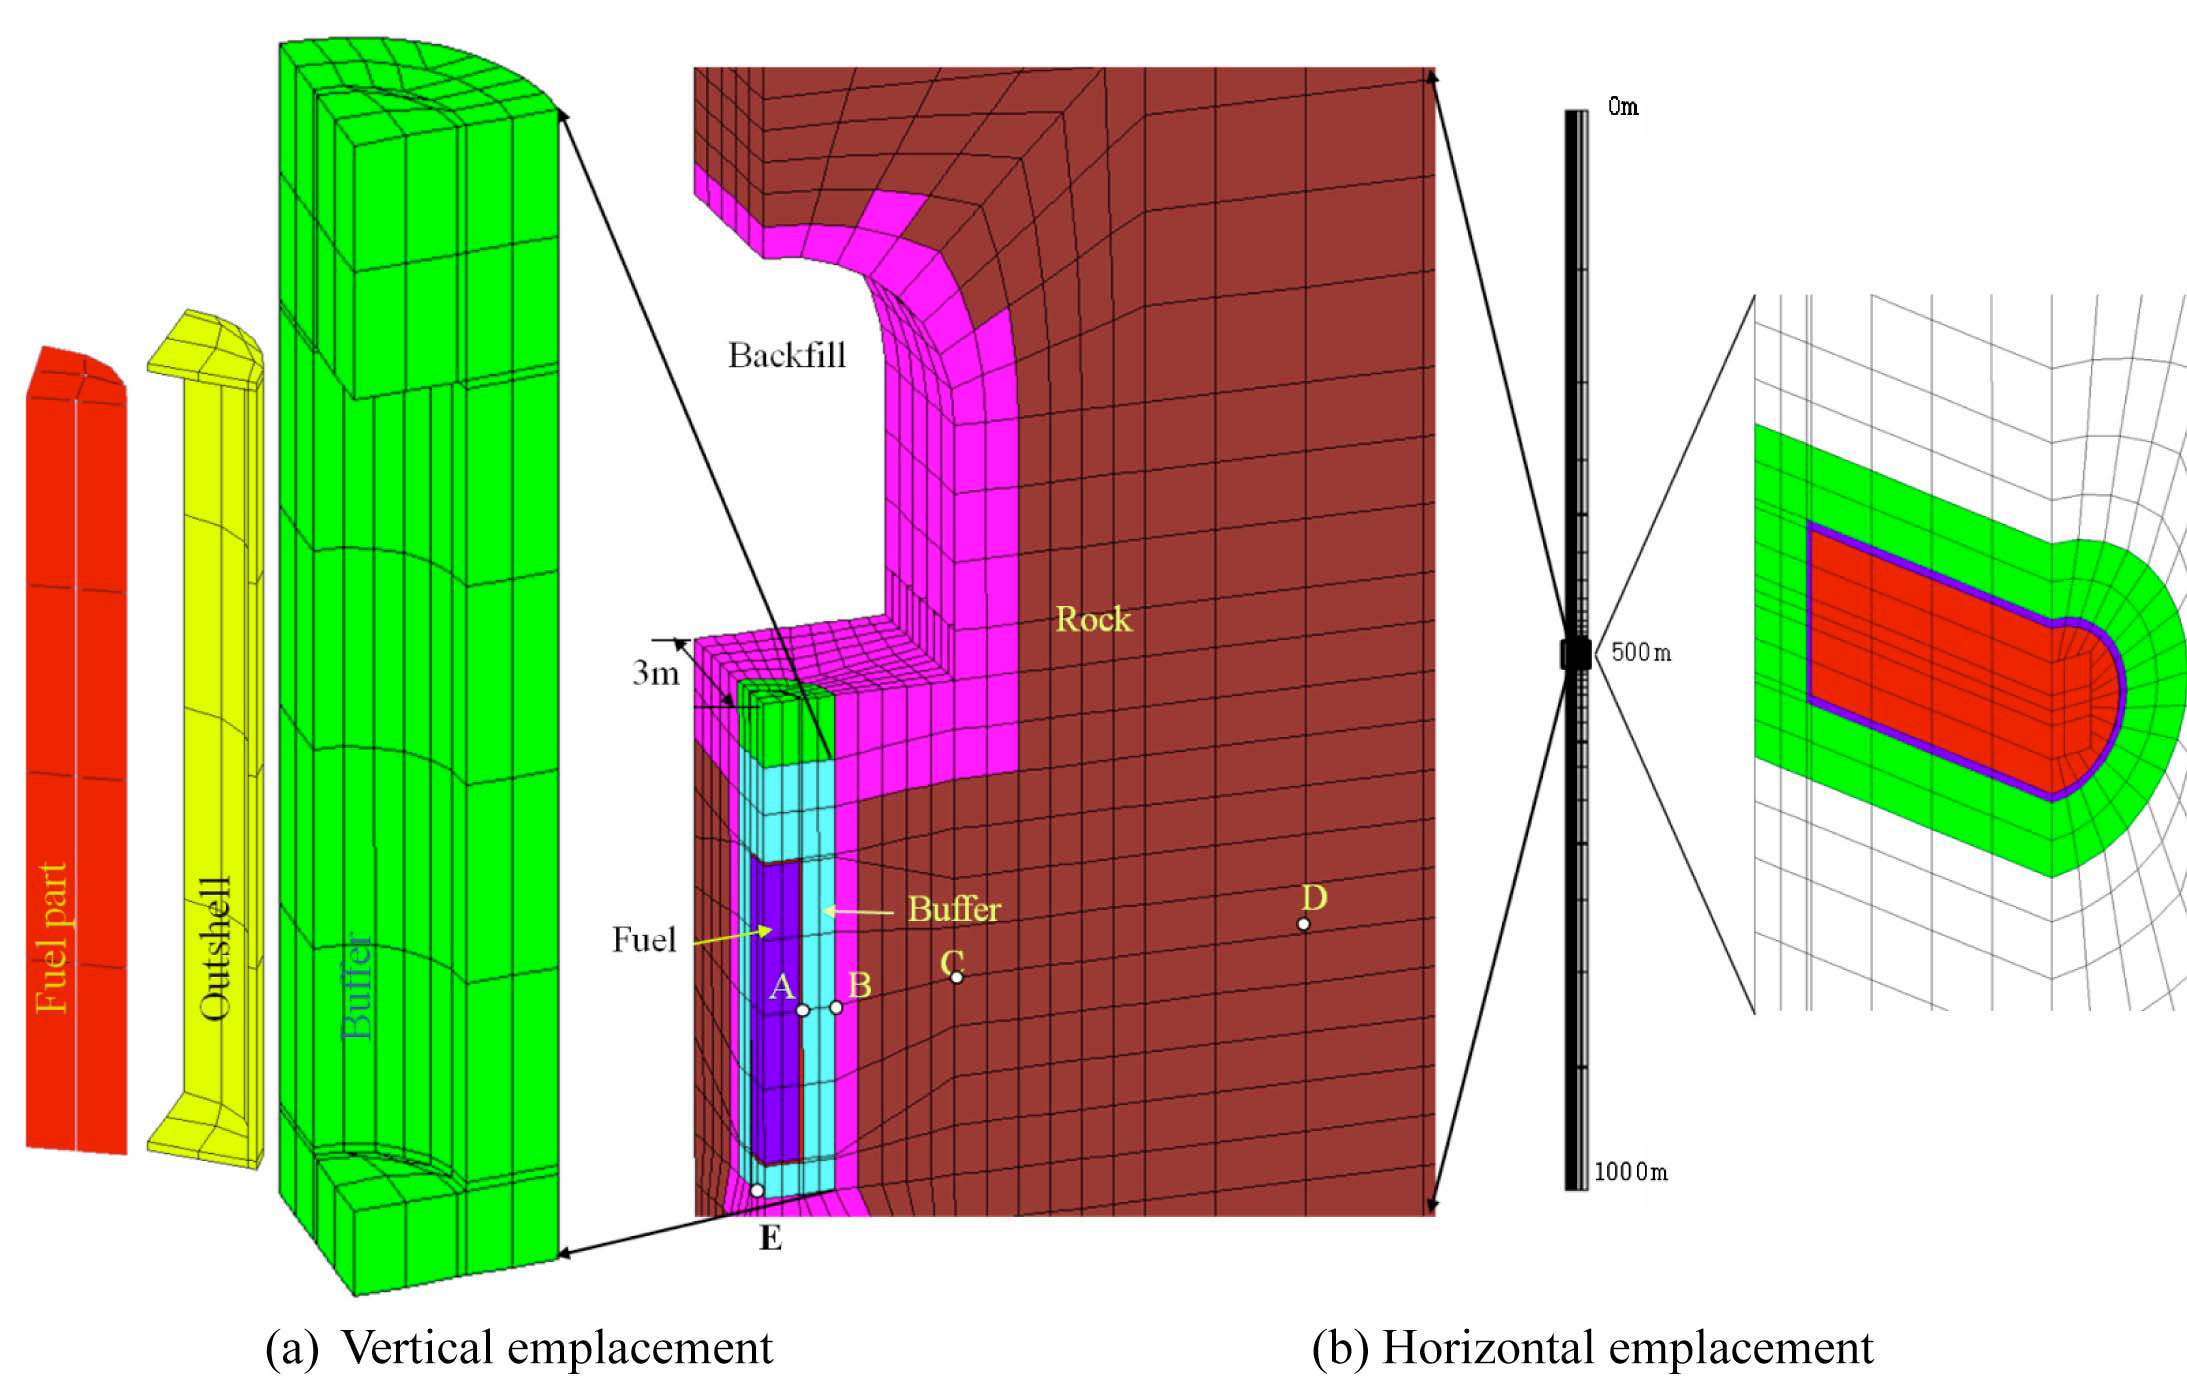 Model Meshes for Vertical and Horizontal Emplacement Cases